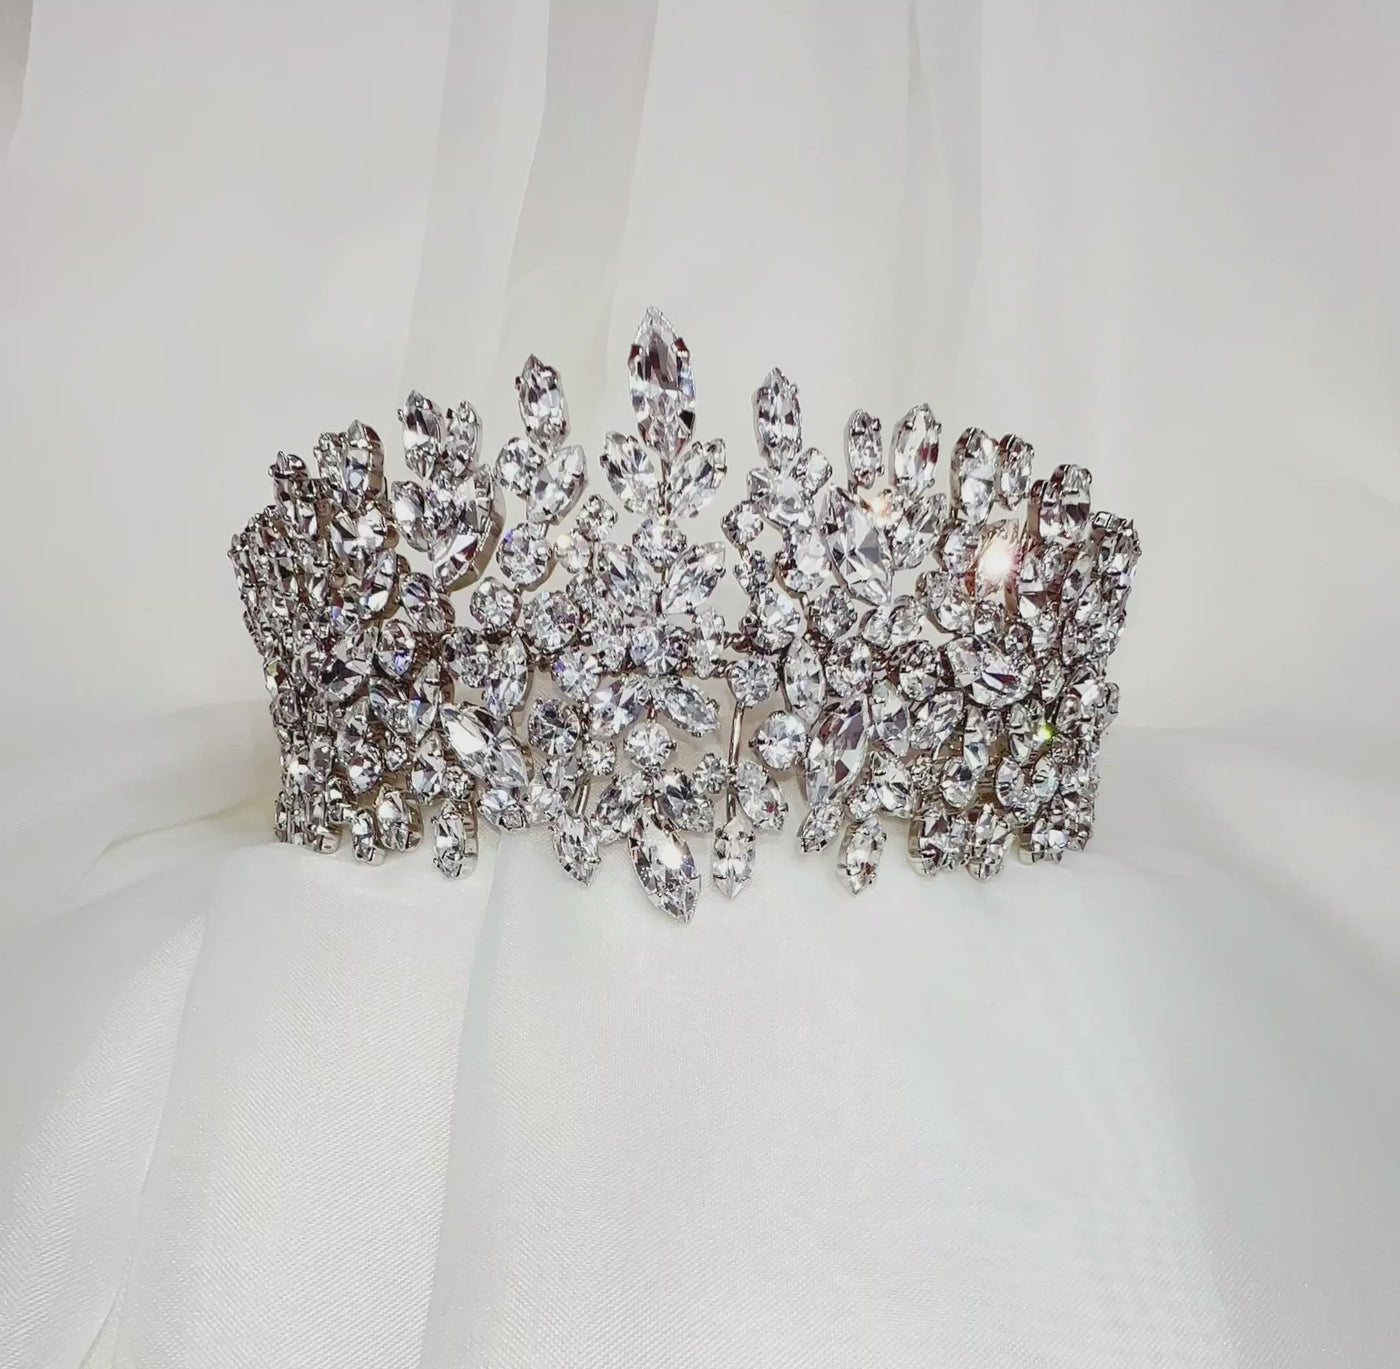 pointed bridal crown made up of round cut sparkling crystal clusters with silver link details